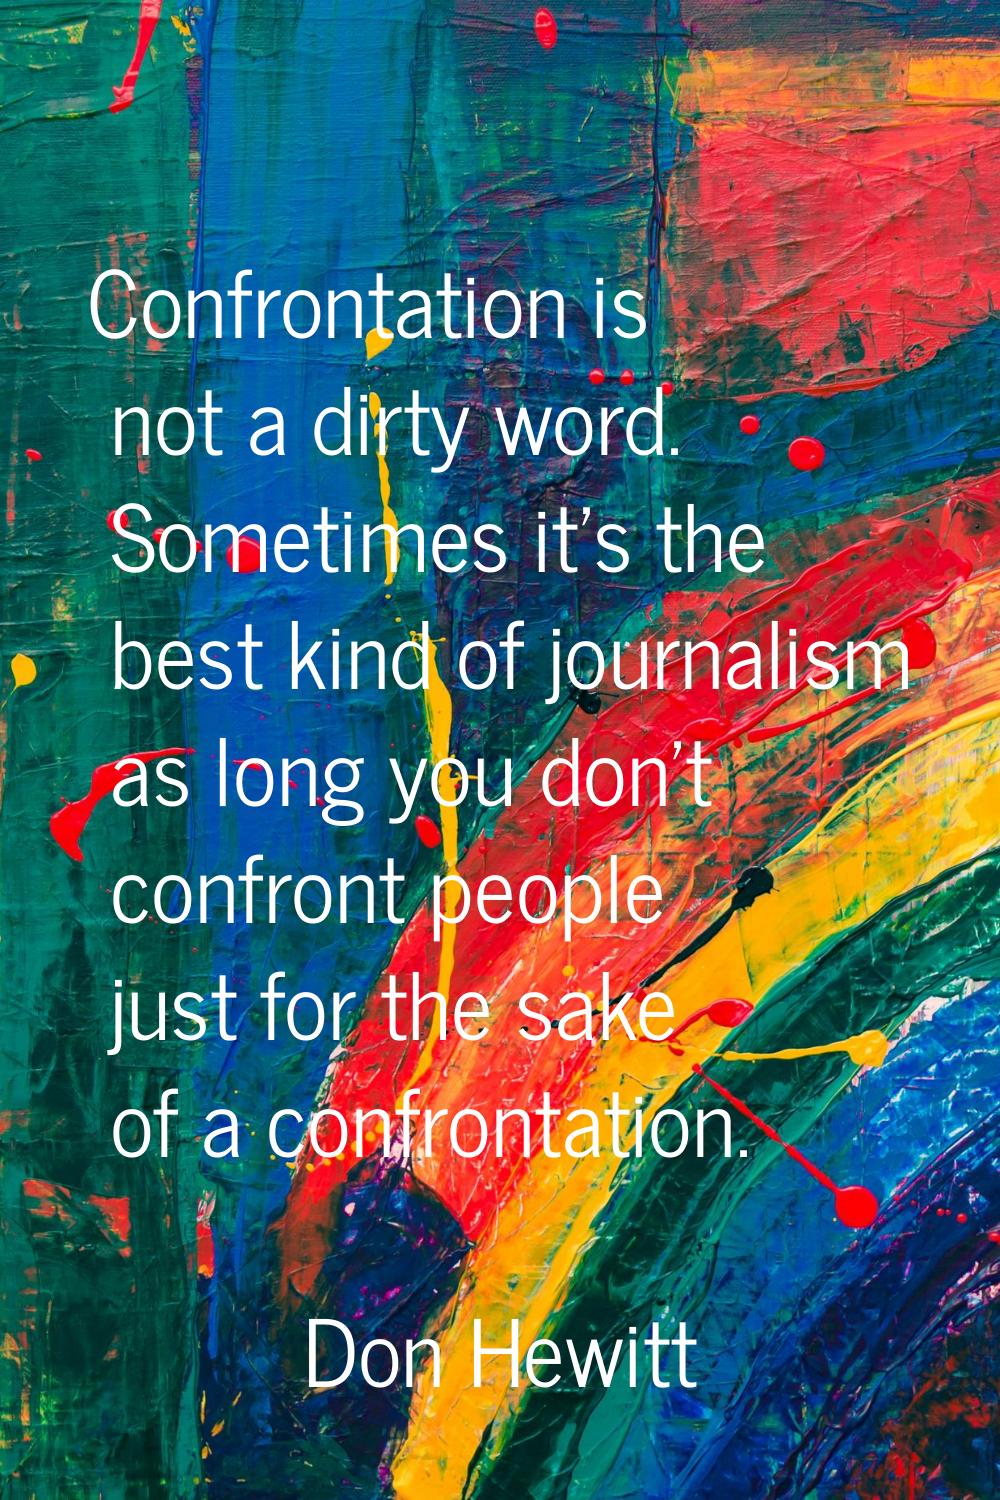 Confrontation is not a dirty word. Sometimes it's the best kind of journalism as long you don't con